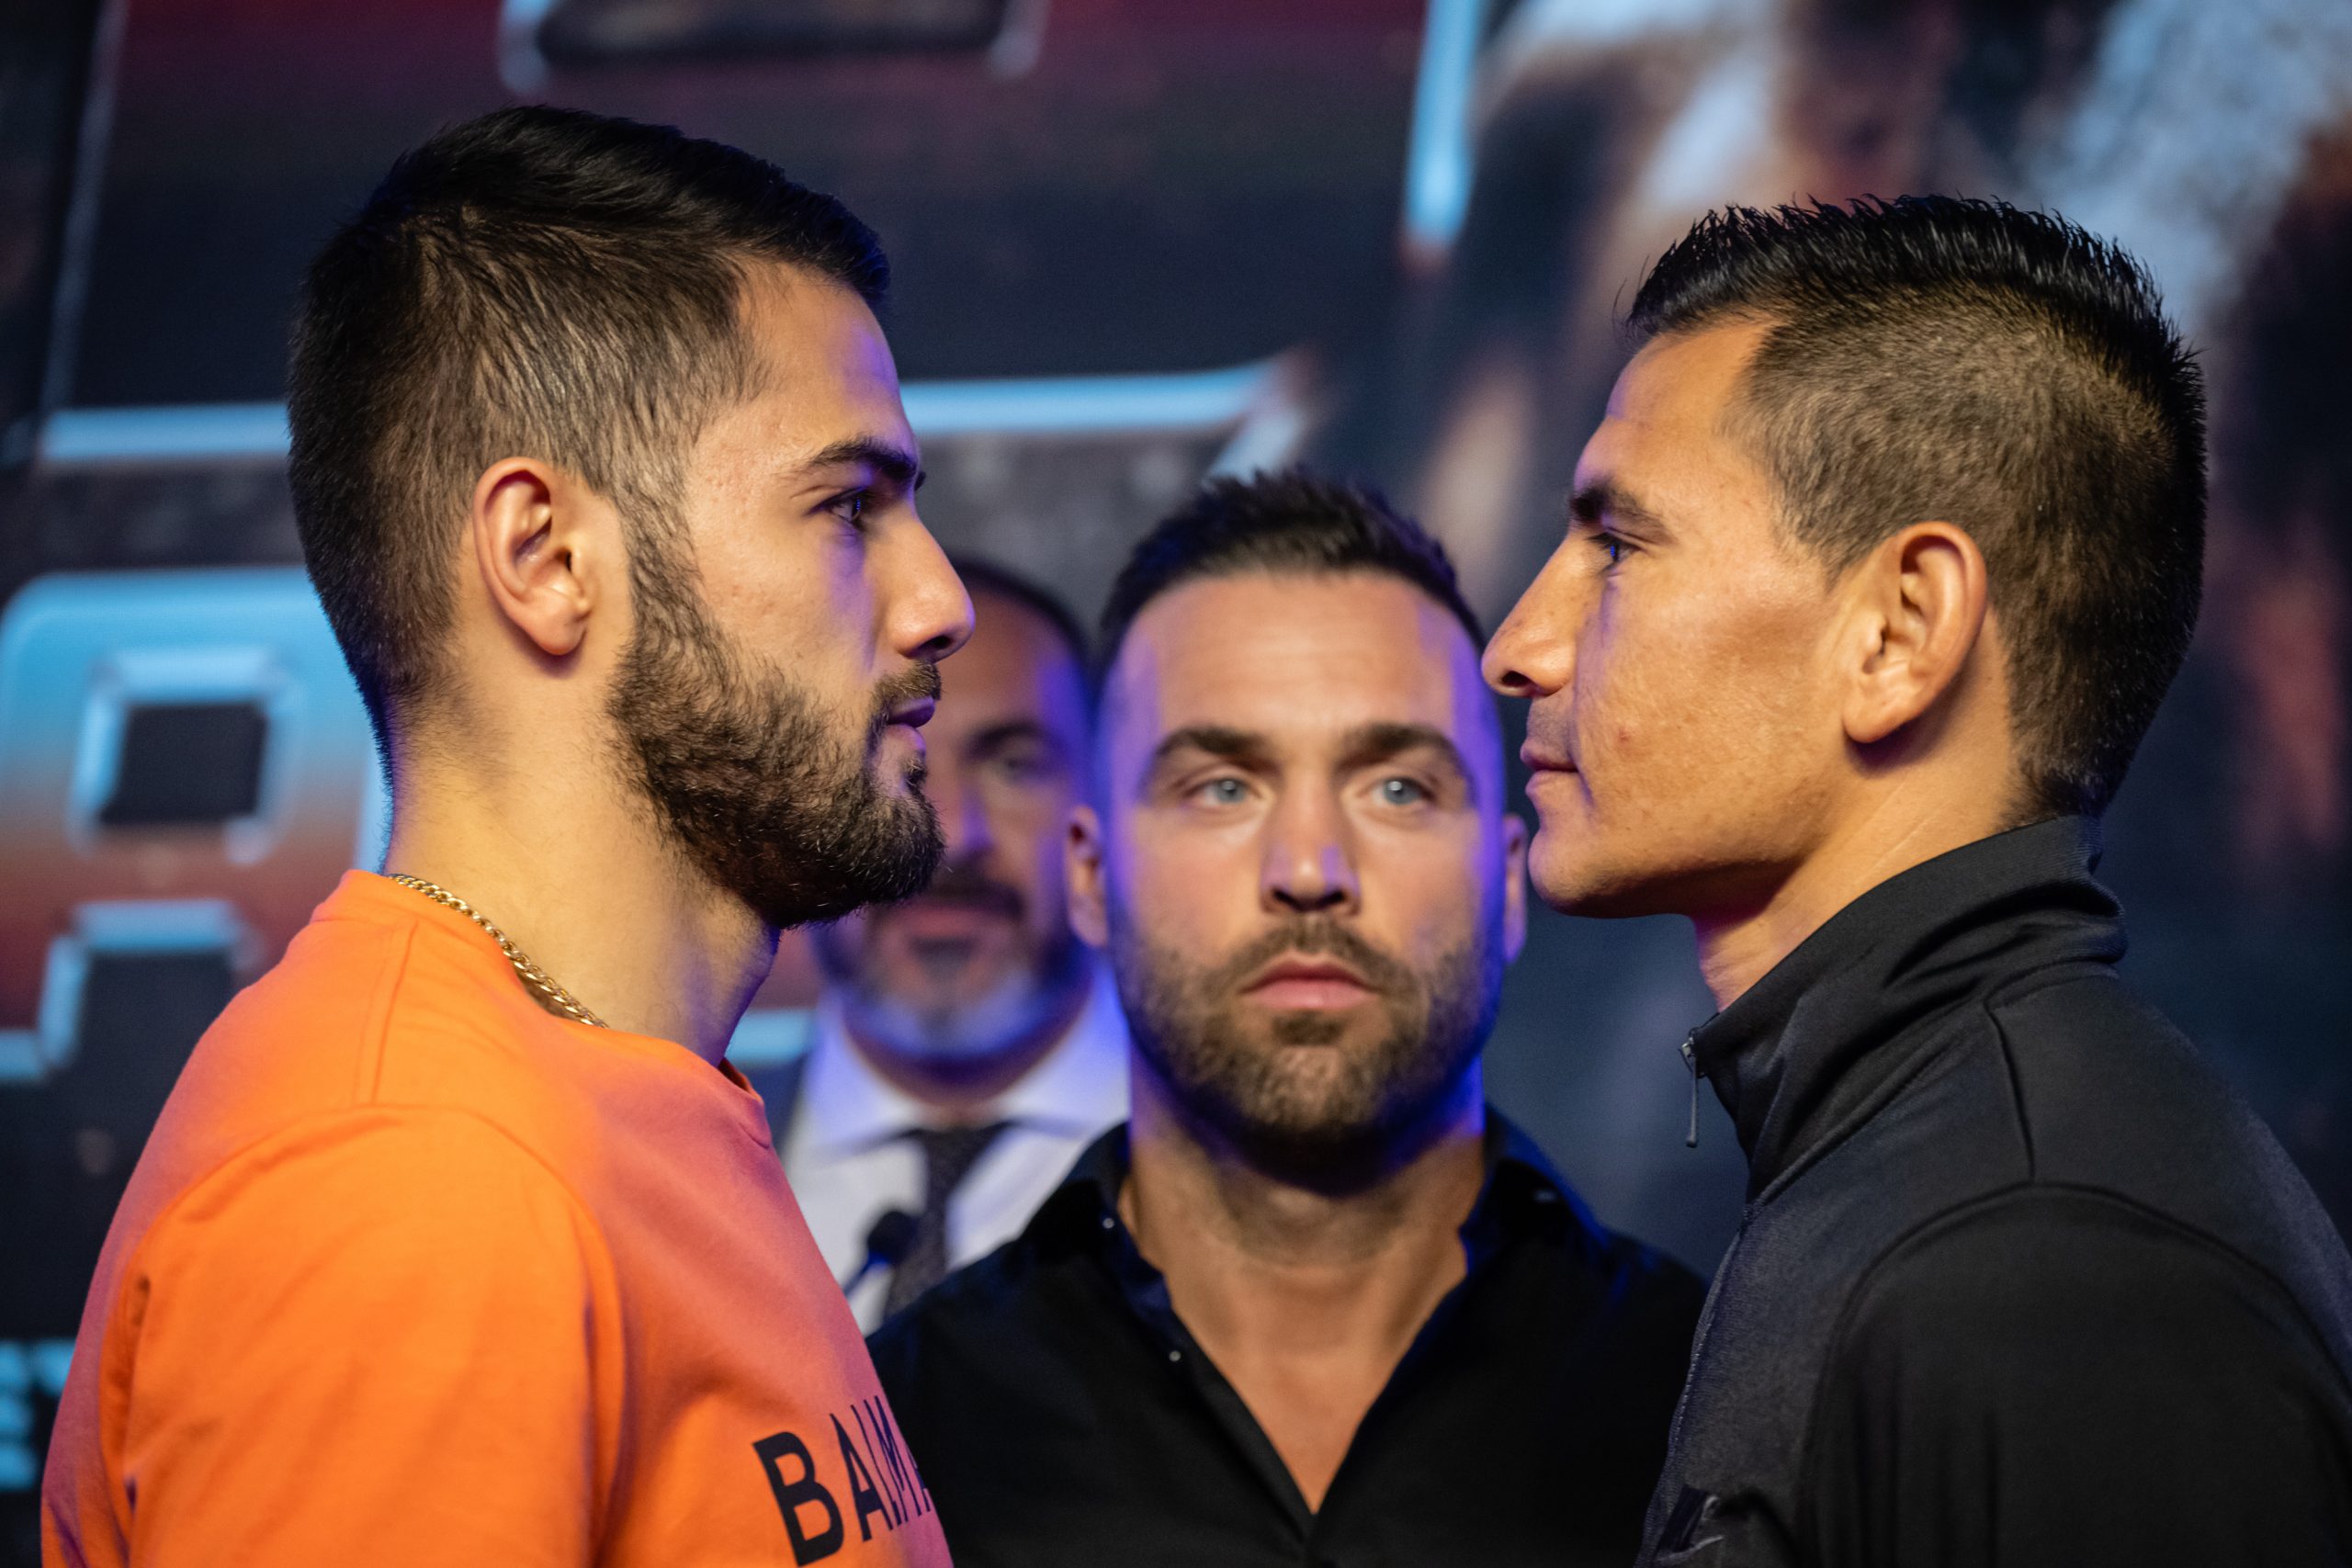 Super middleweights Erik Bazinyan and Jose Macias make weight for NABF title bout